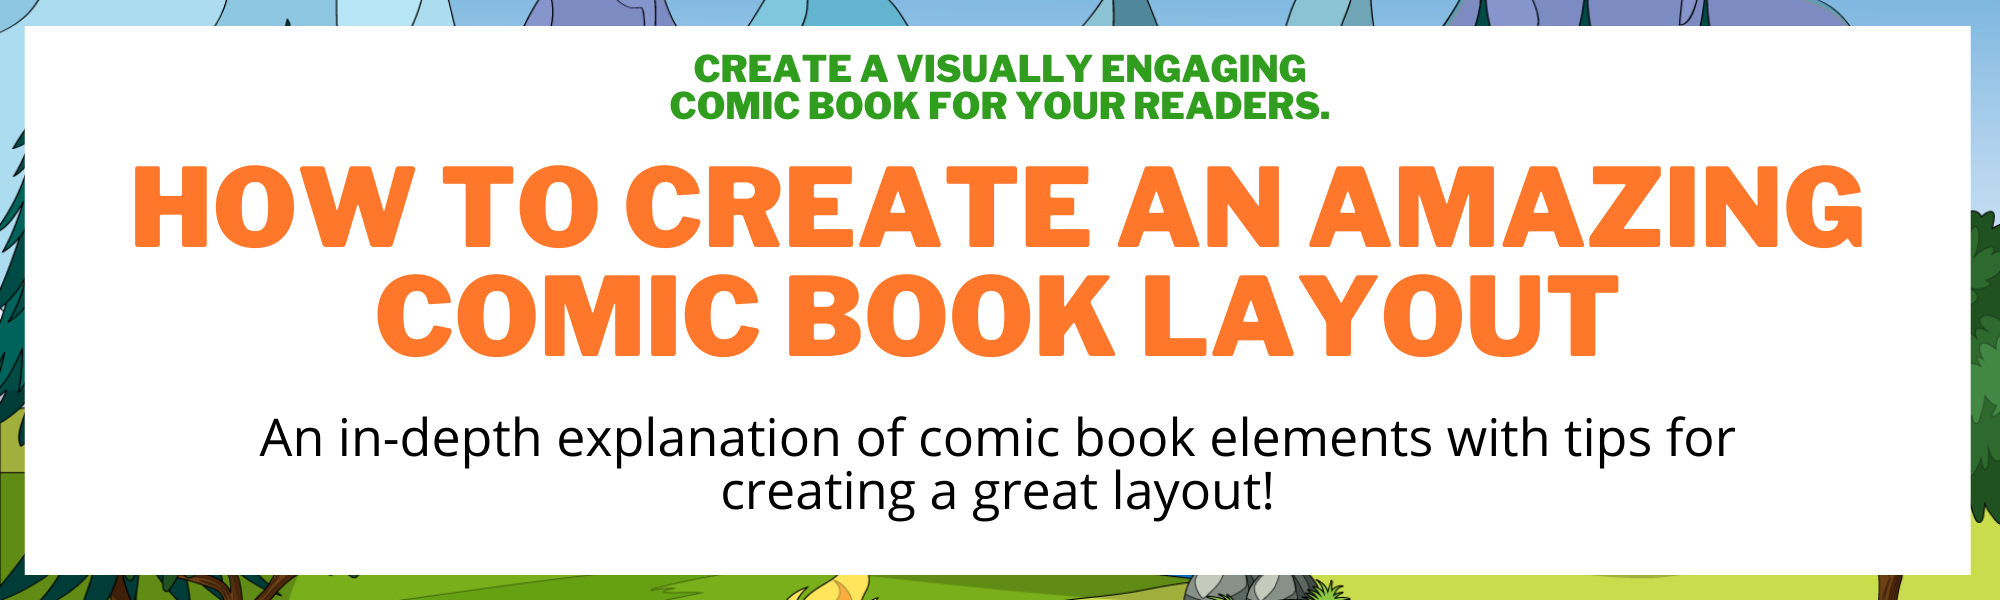 Create Your Own Comic Book Kit|Other Format